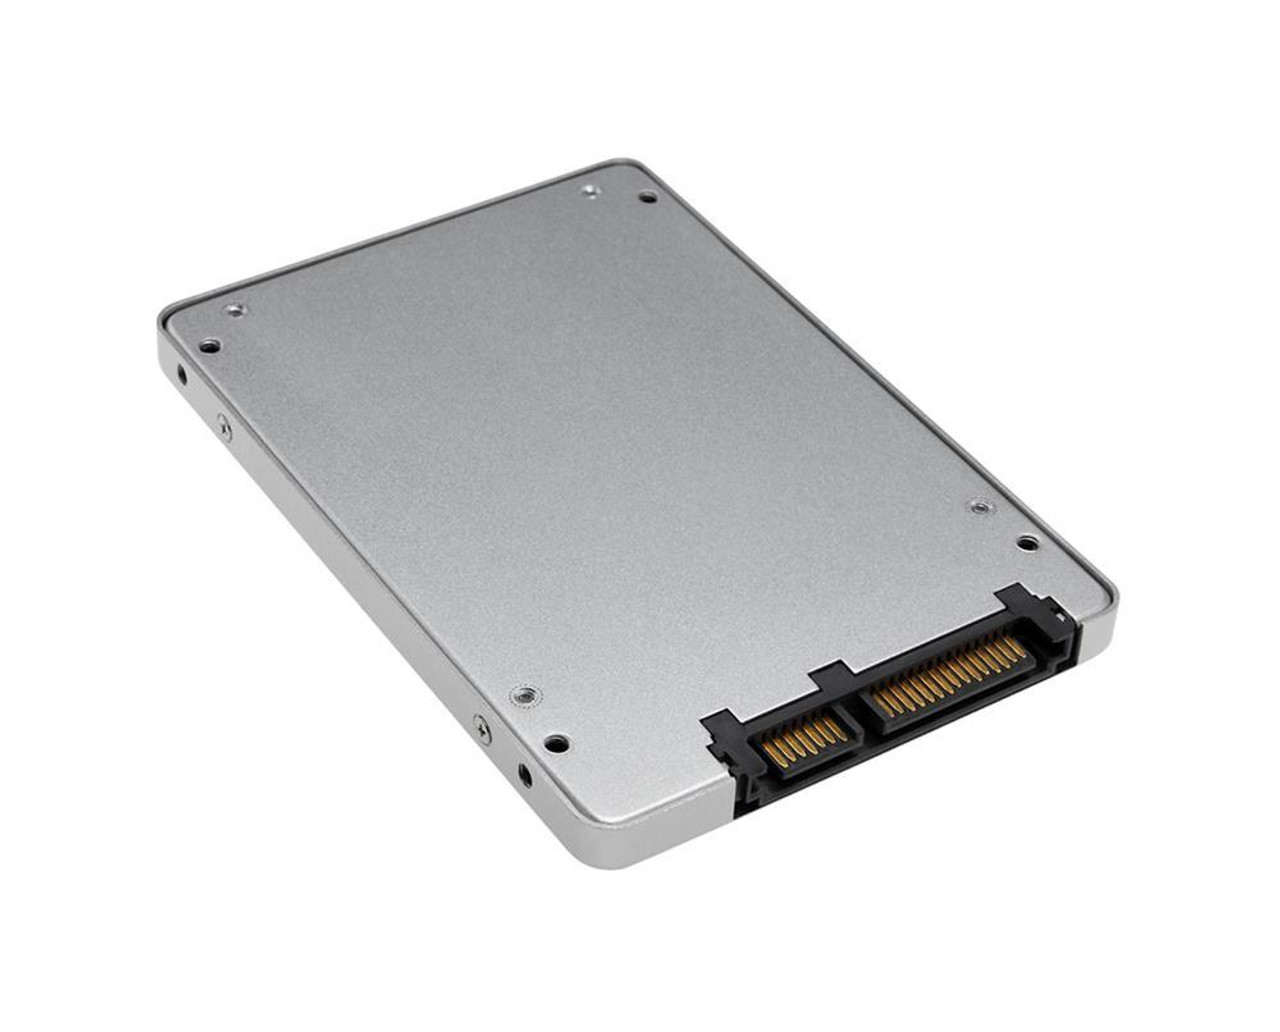 03B01000305DP ASUS 64GB MLC SATA 6Gbps 2.5-inch Internal Solid State Drive (SSD) for All-in-one E Series